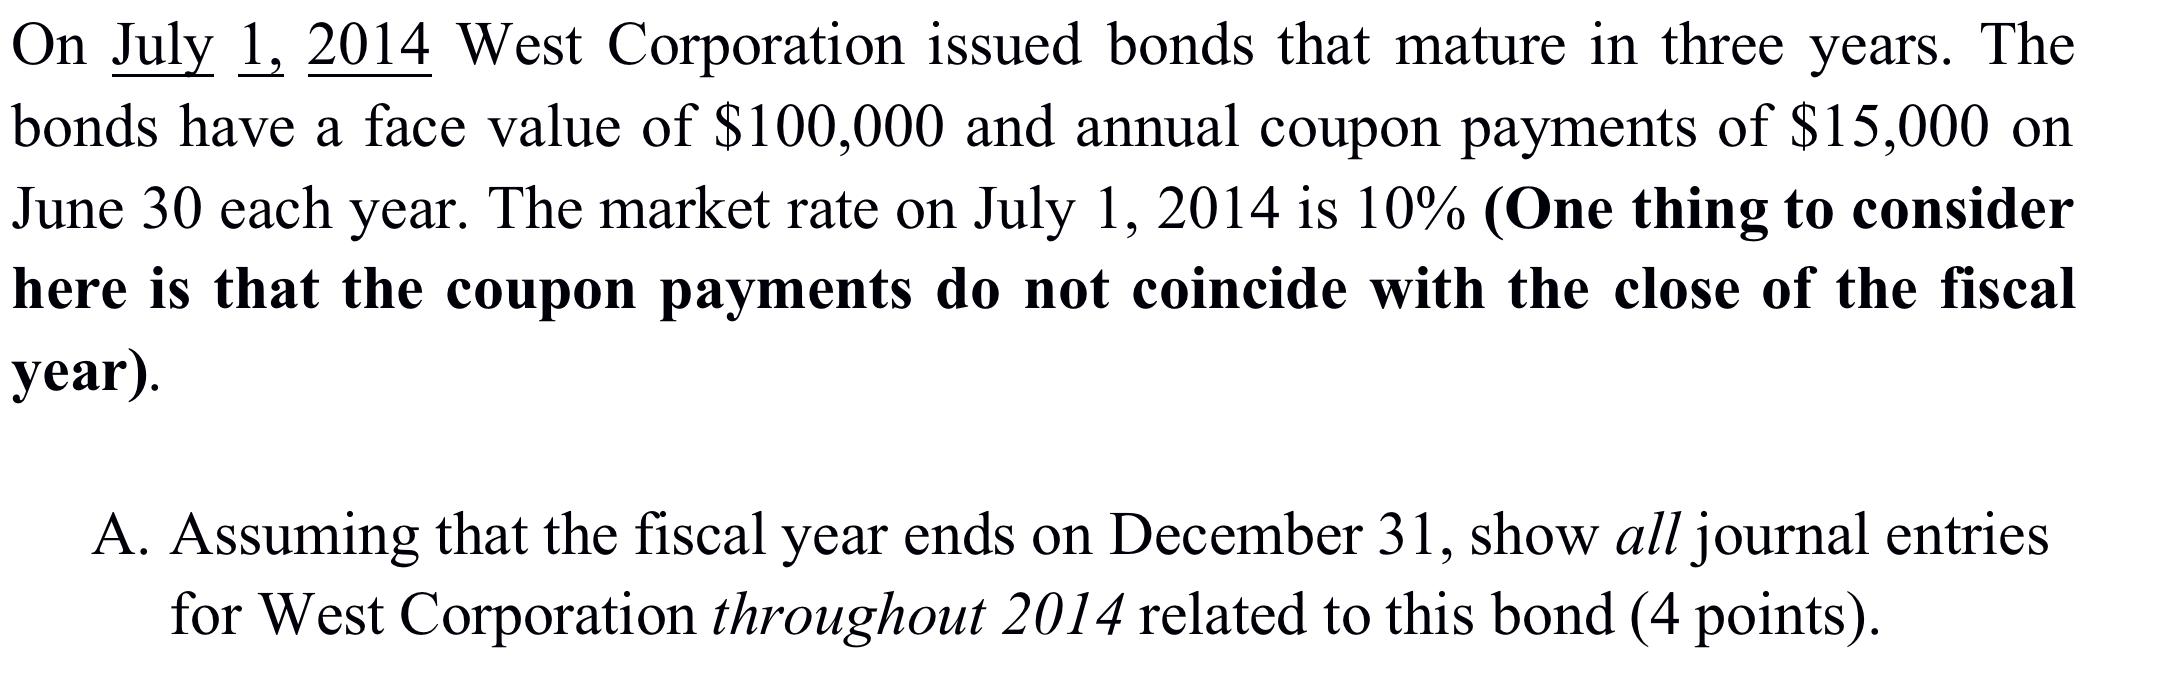 On July 1, 2014 West Corporation issued bonds that mature in three years. Thebonds have a face value of $100,000 and annual